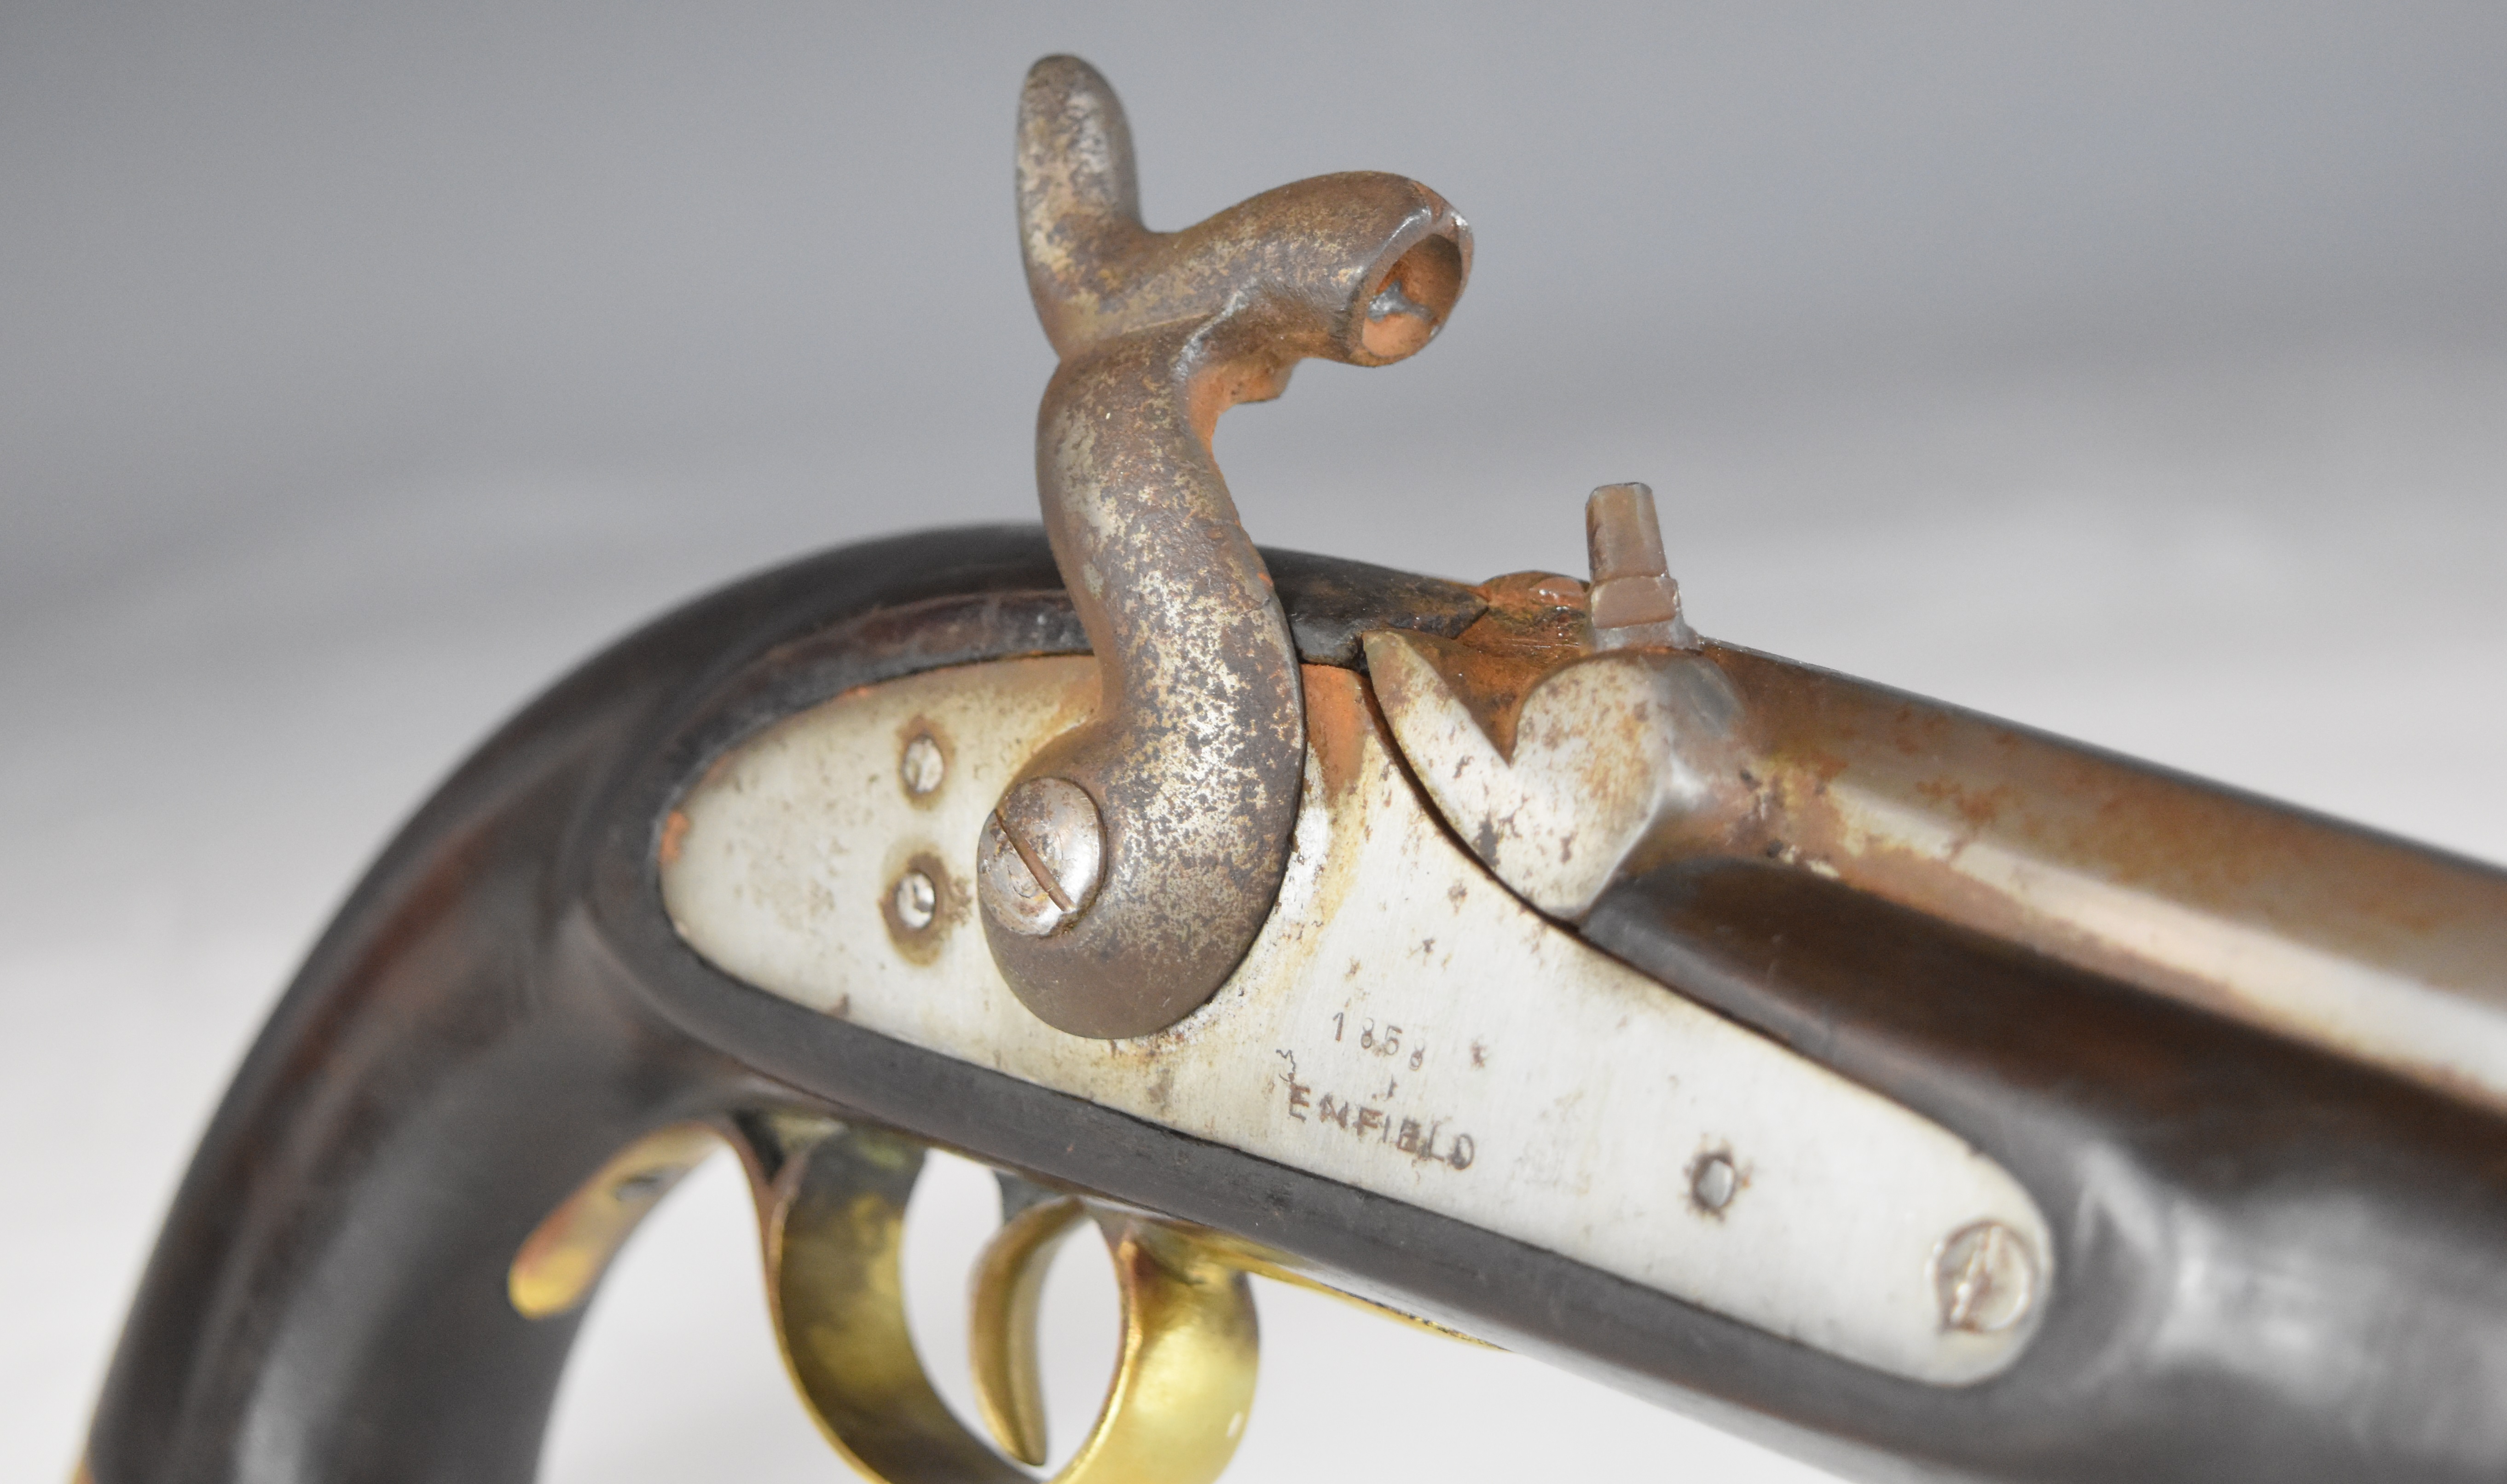 Enfield percussion hammer action sea-service pistol with lock stamped '1858 Enfield' brass trigger - Image 9 of 12